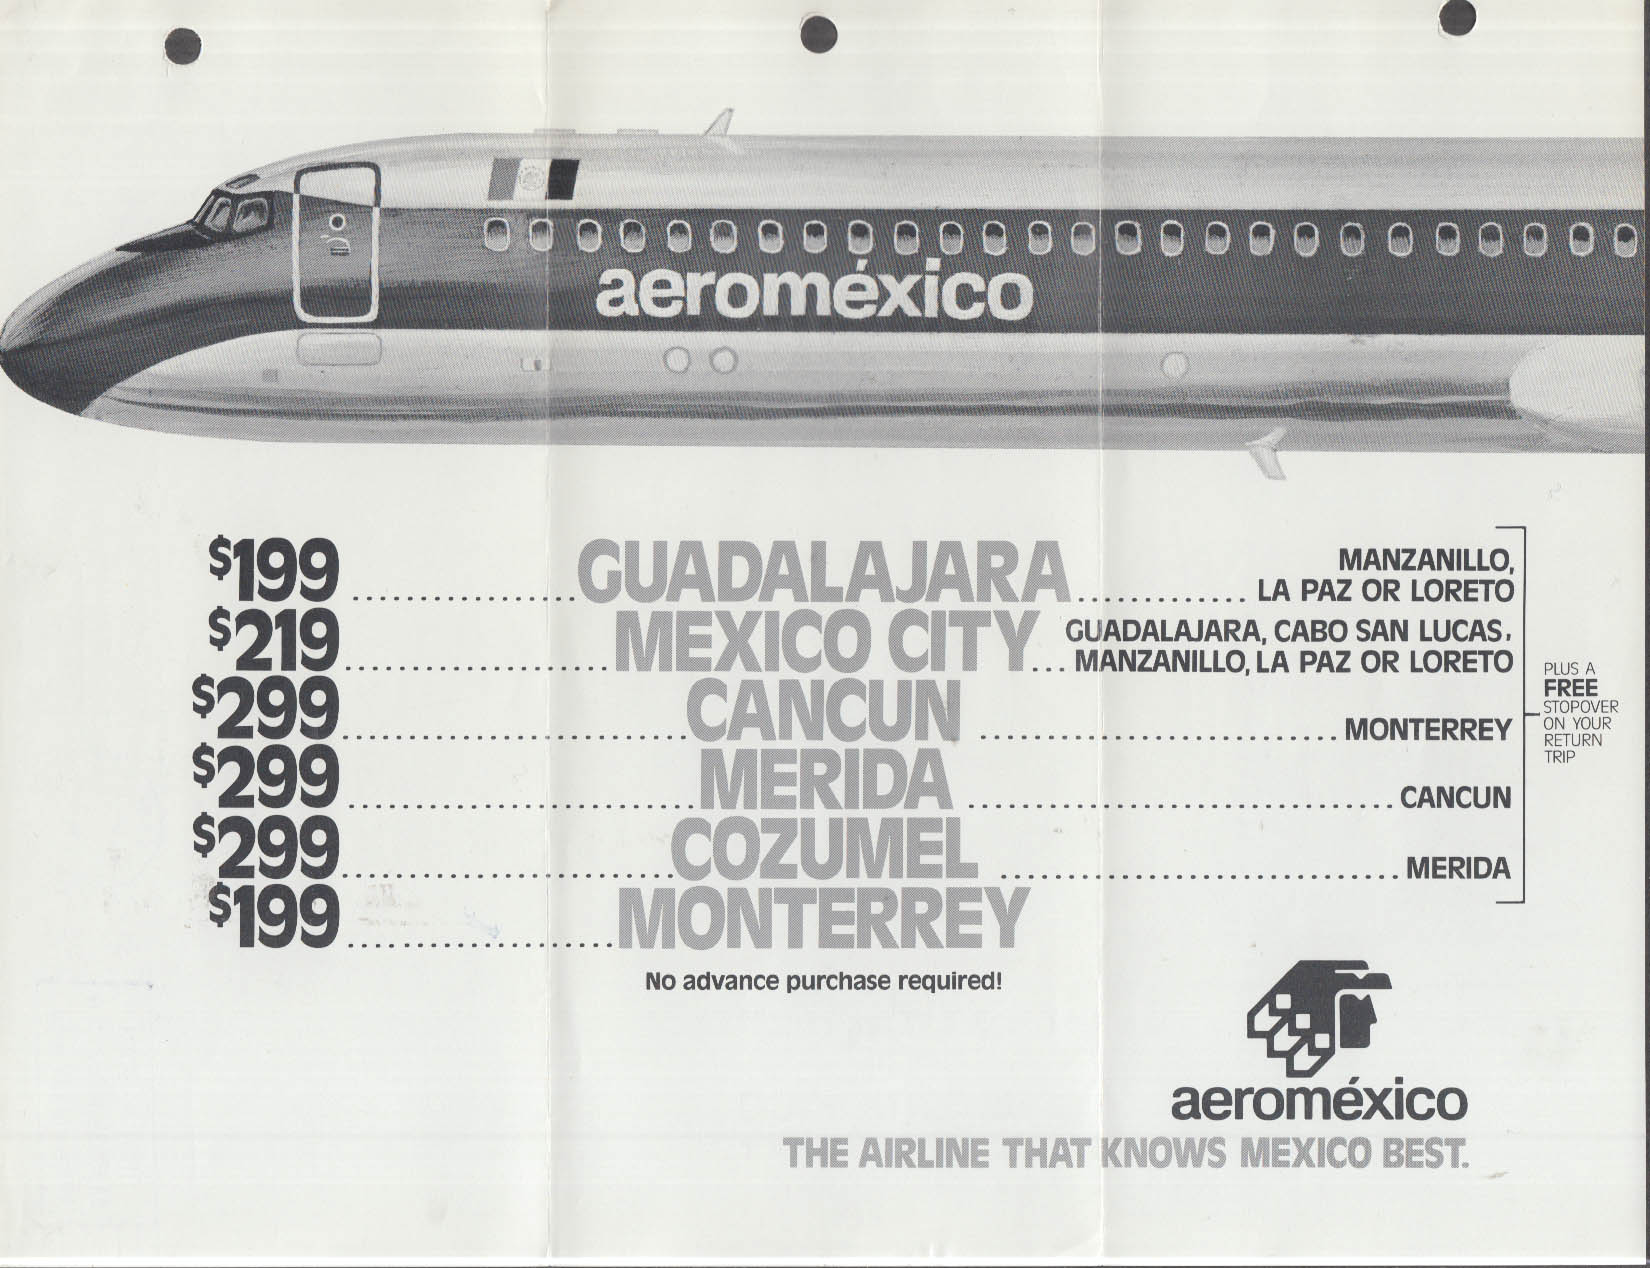 Aeromexico Lowest Roundtrip Airfares from Los Angeles mailer 1983